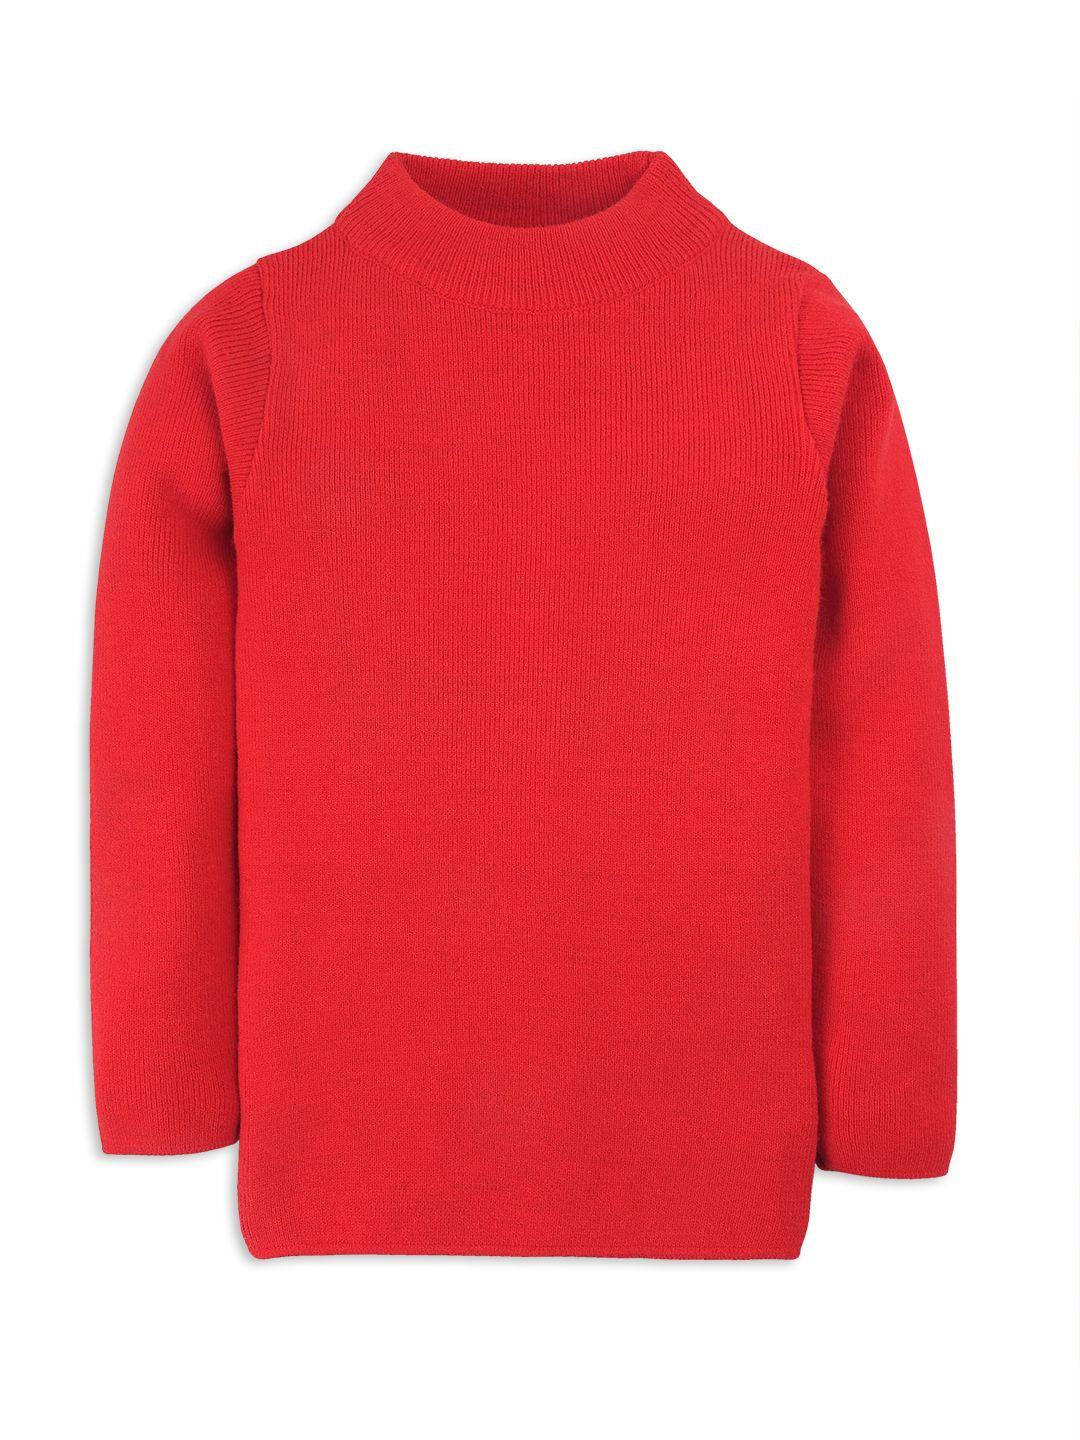 rvk kids red solid sweater